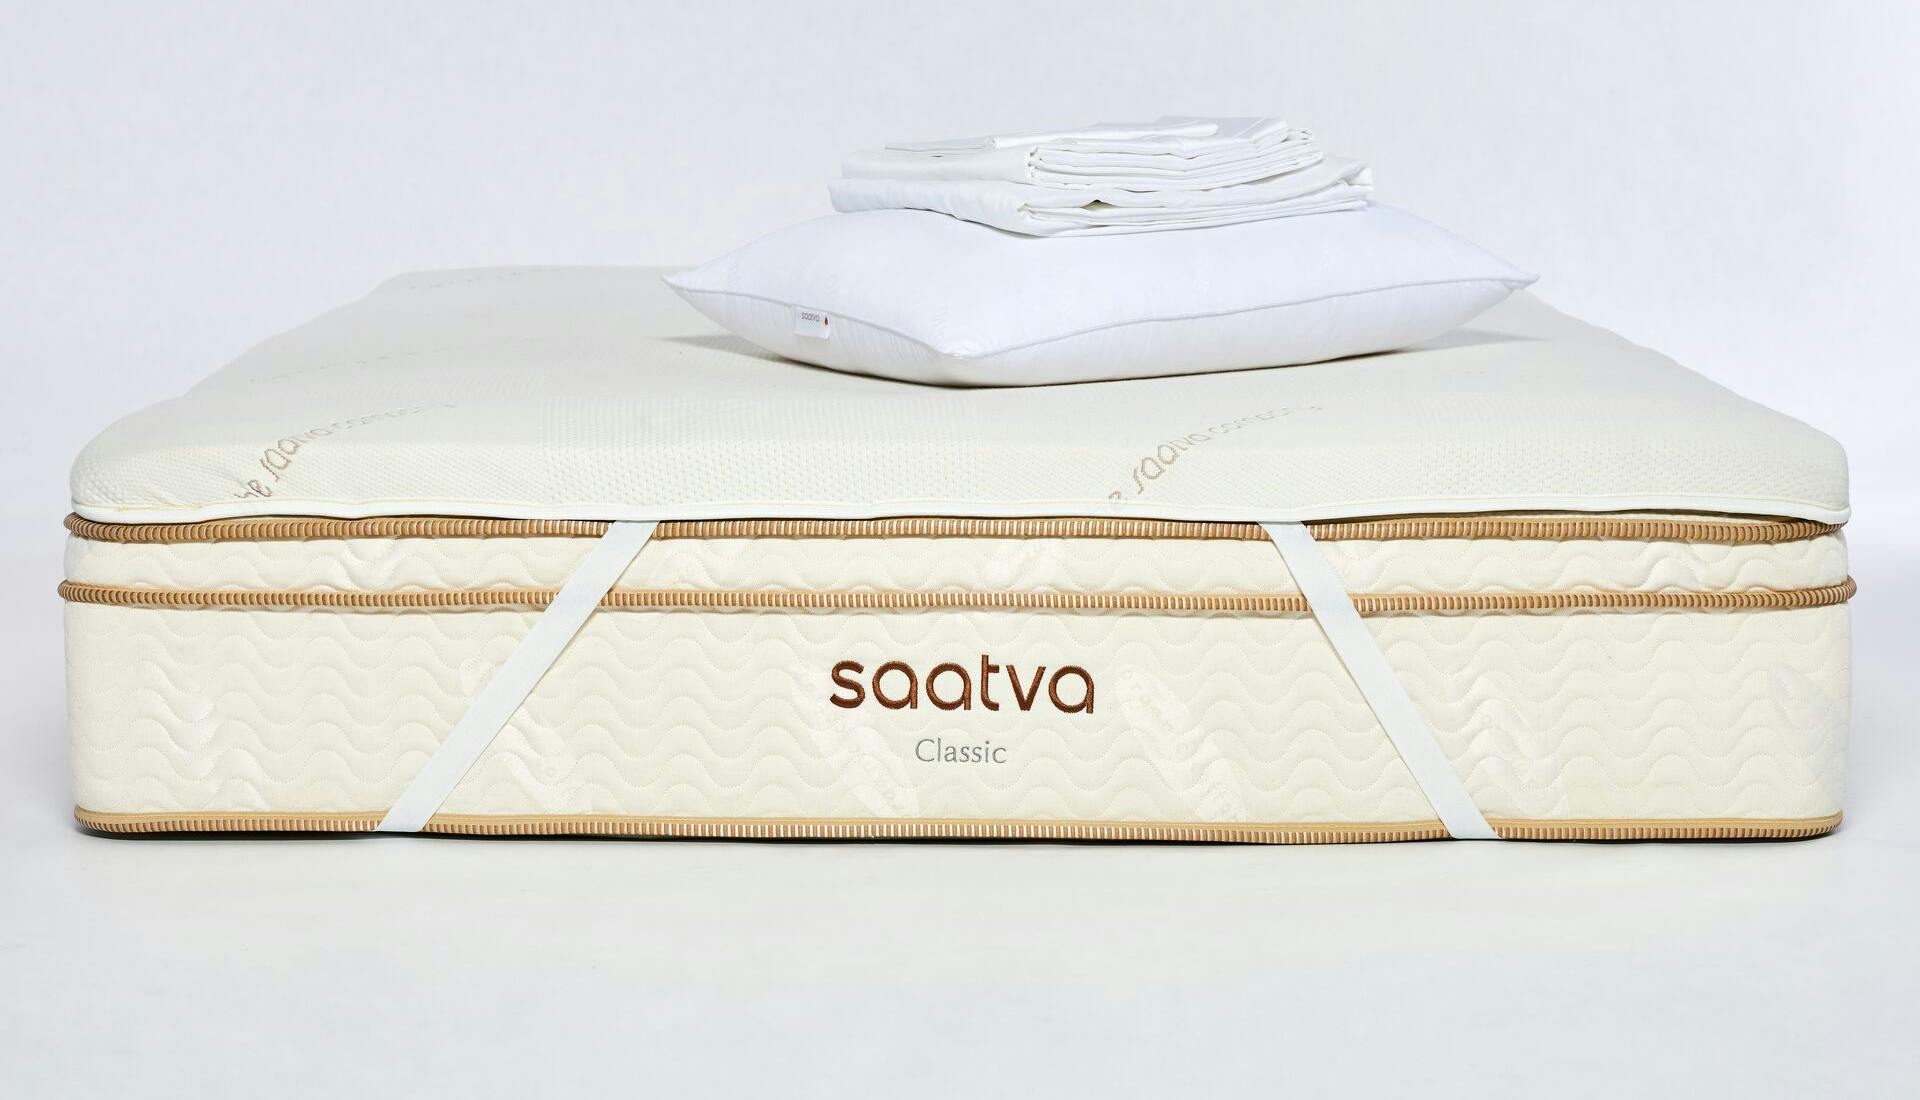 The Saatva Back-To-School Bedding Bundle which includes a memory foam mattress topper, a down alternative pillow, and the organic percale sheet set, all placed on an award-winning Saatva Classic Innerspring Mattress